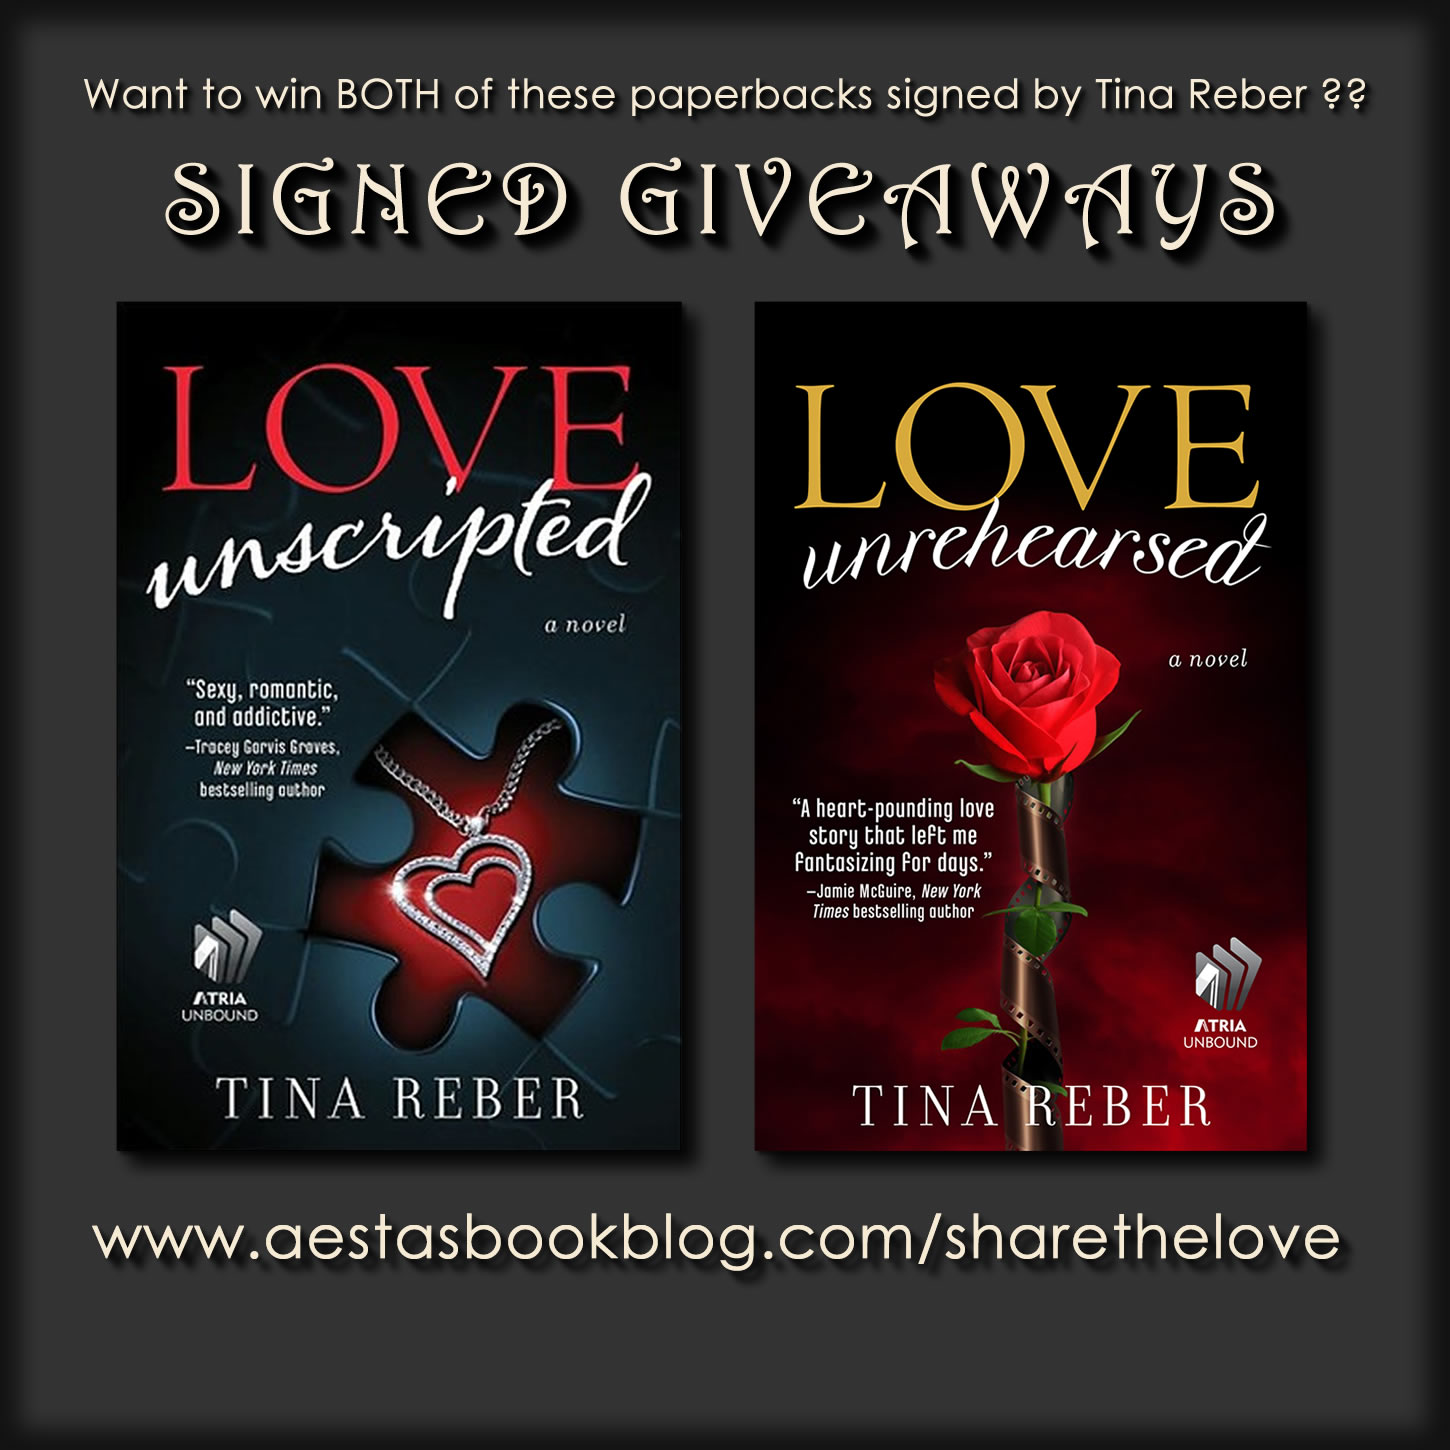 ♥ SHARE THE LOVE GIVEAWAY ♥